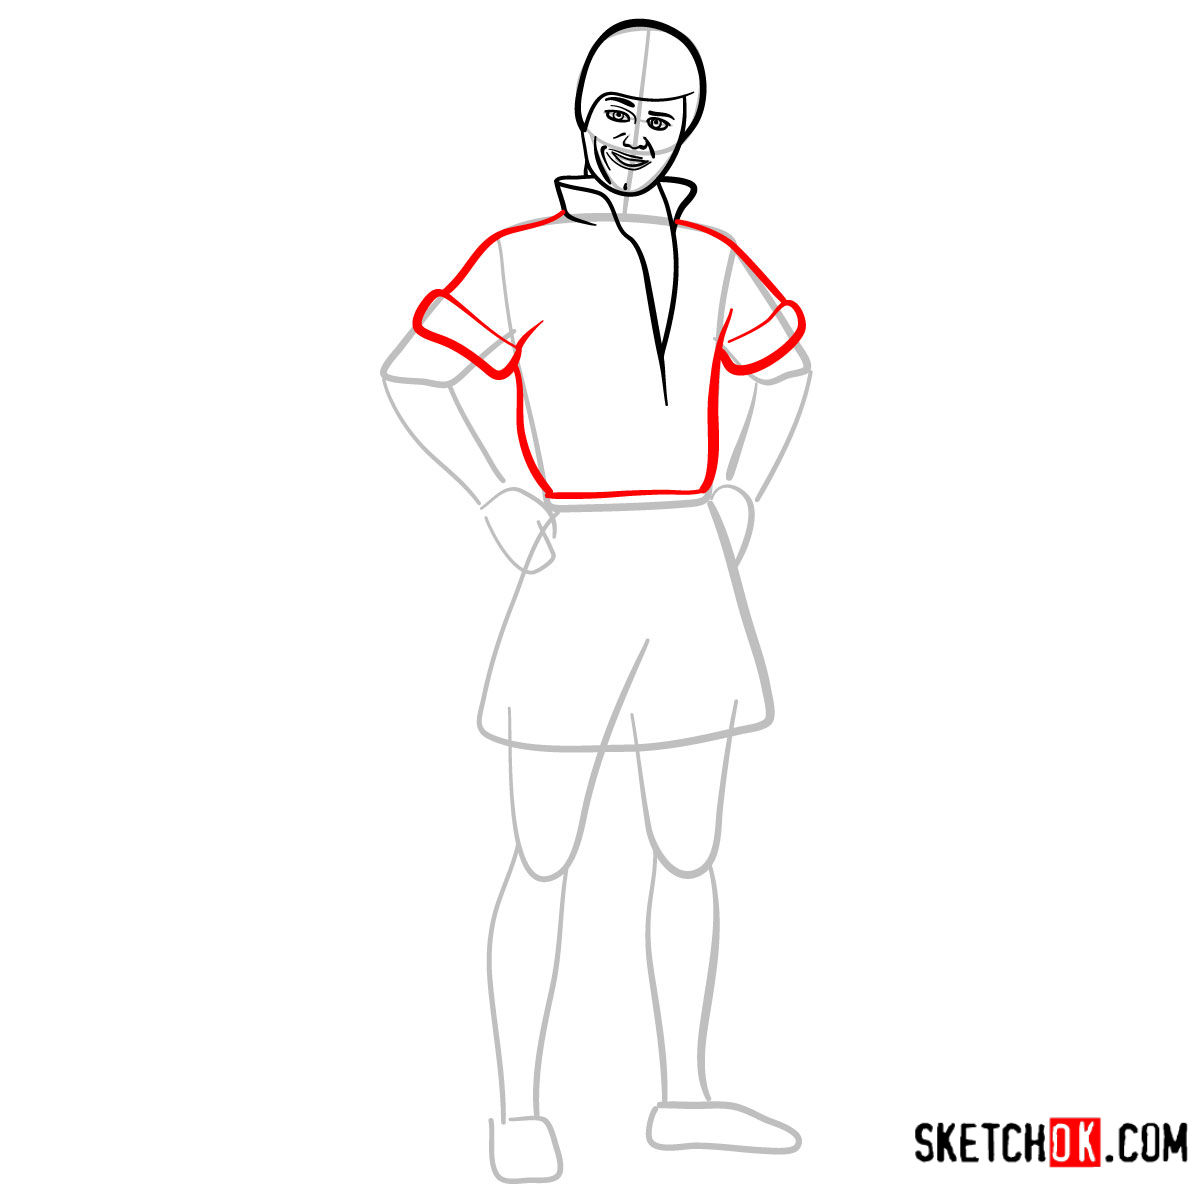 How to draw Ken from Toy Story - step 06